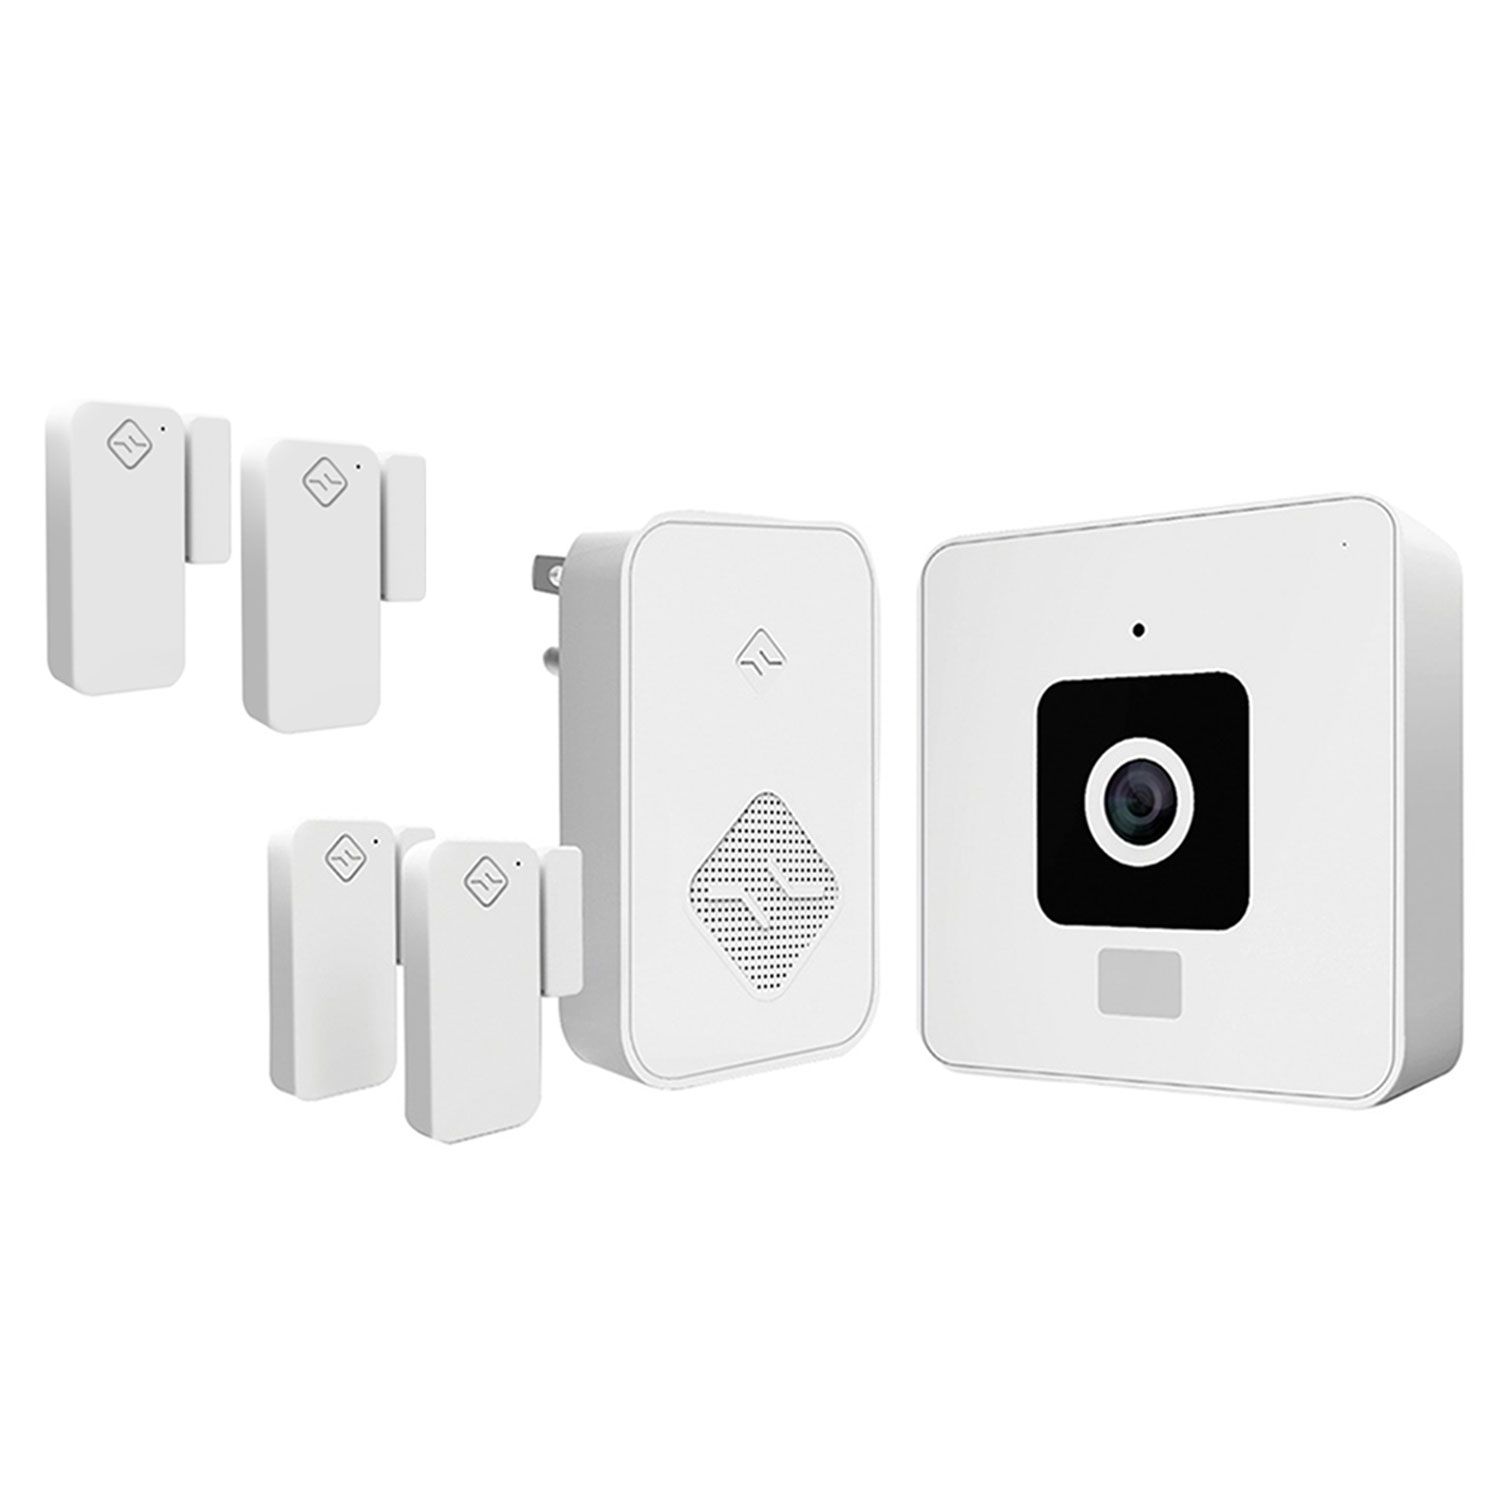 SimplySmart Home Complete Wireless Home Security System